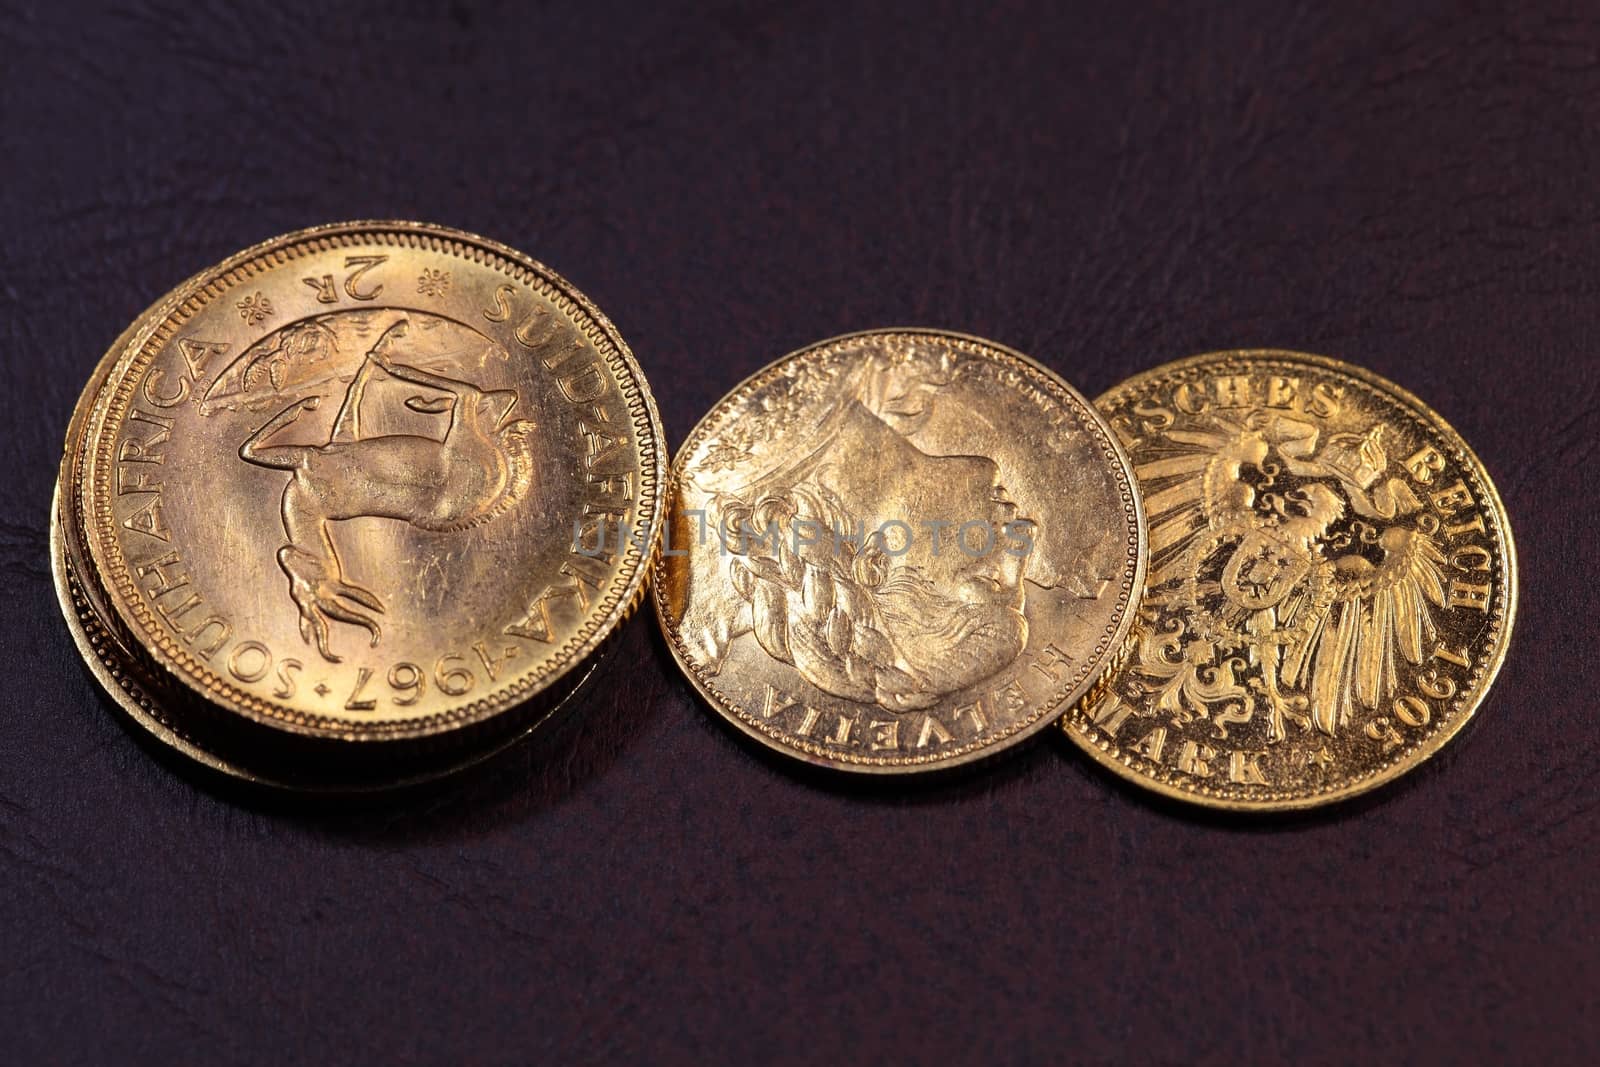 Old gold coins on a dark background